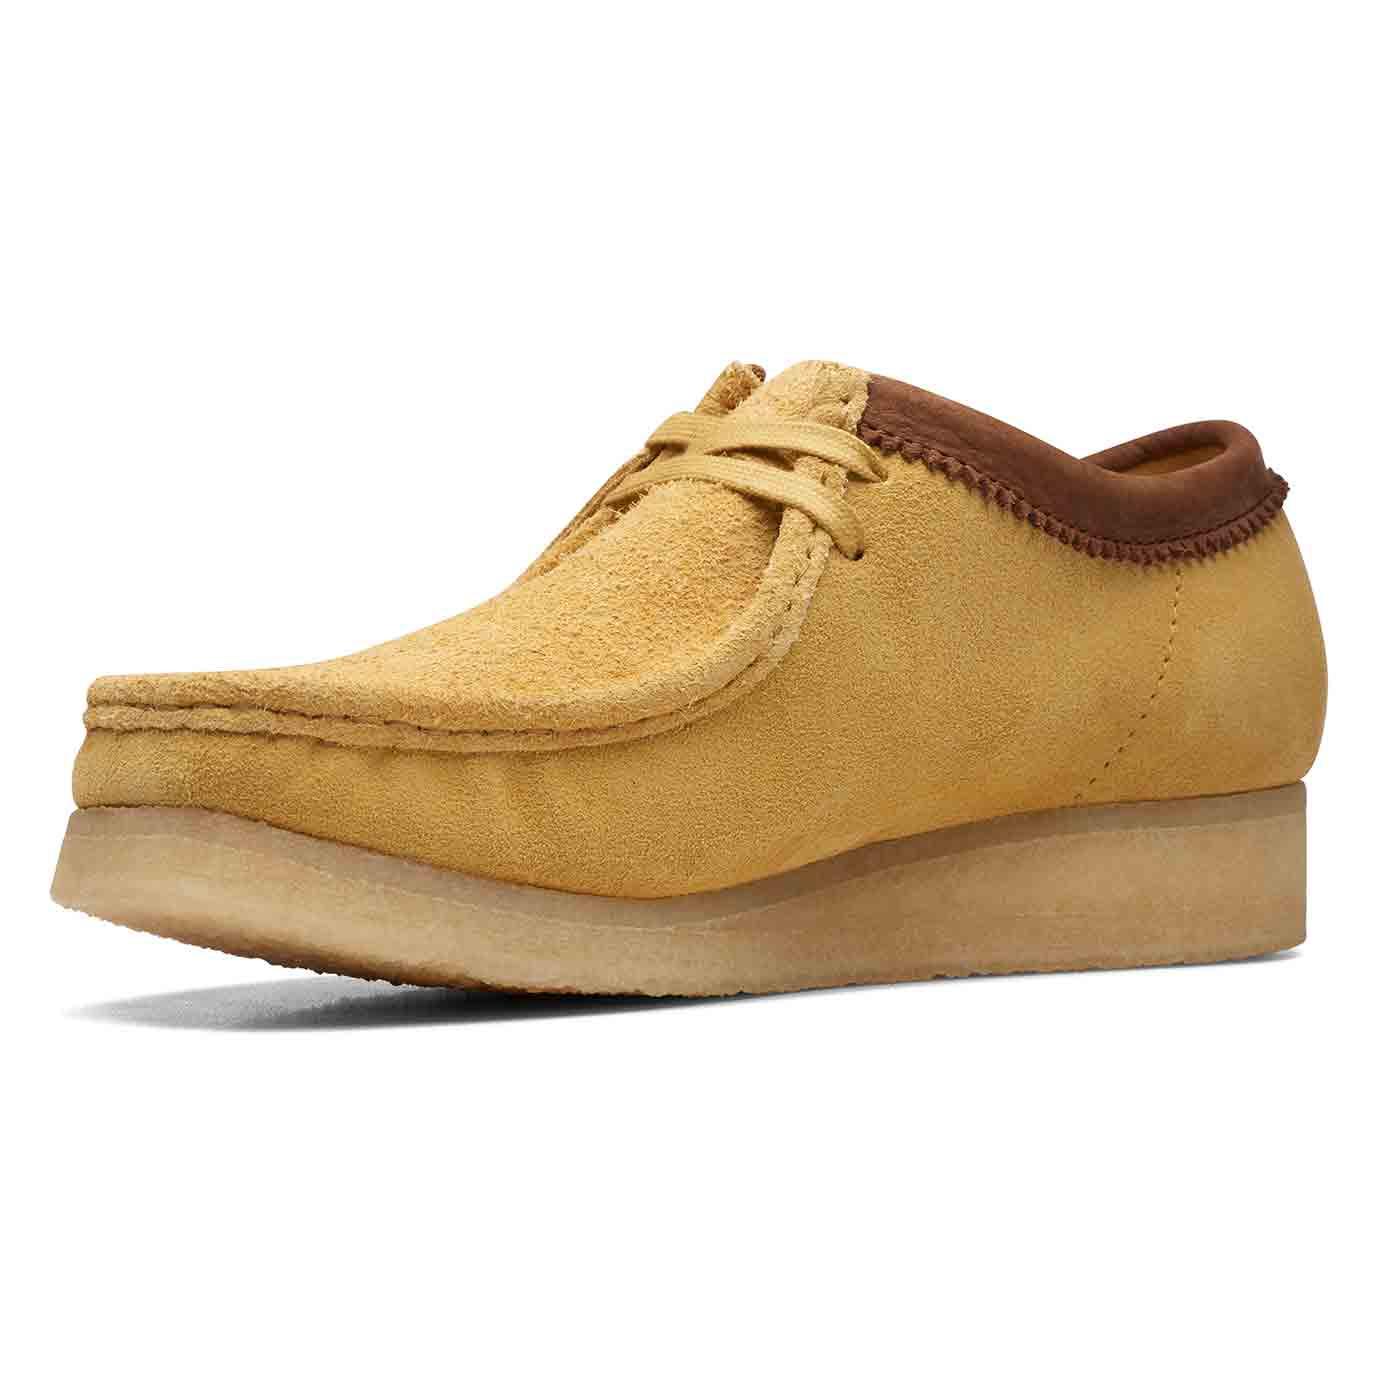 Wallabee CLARKS ORIGINALS Mod Moccasin Shoes in Yellow